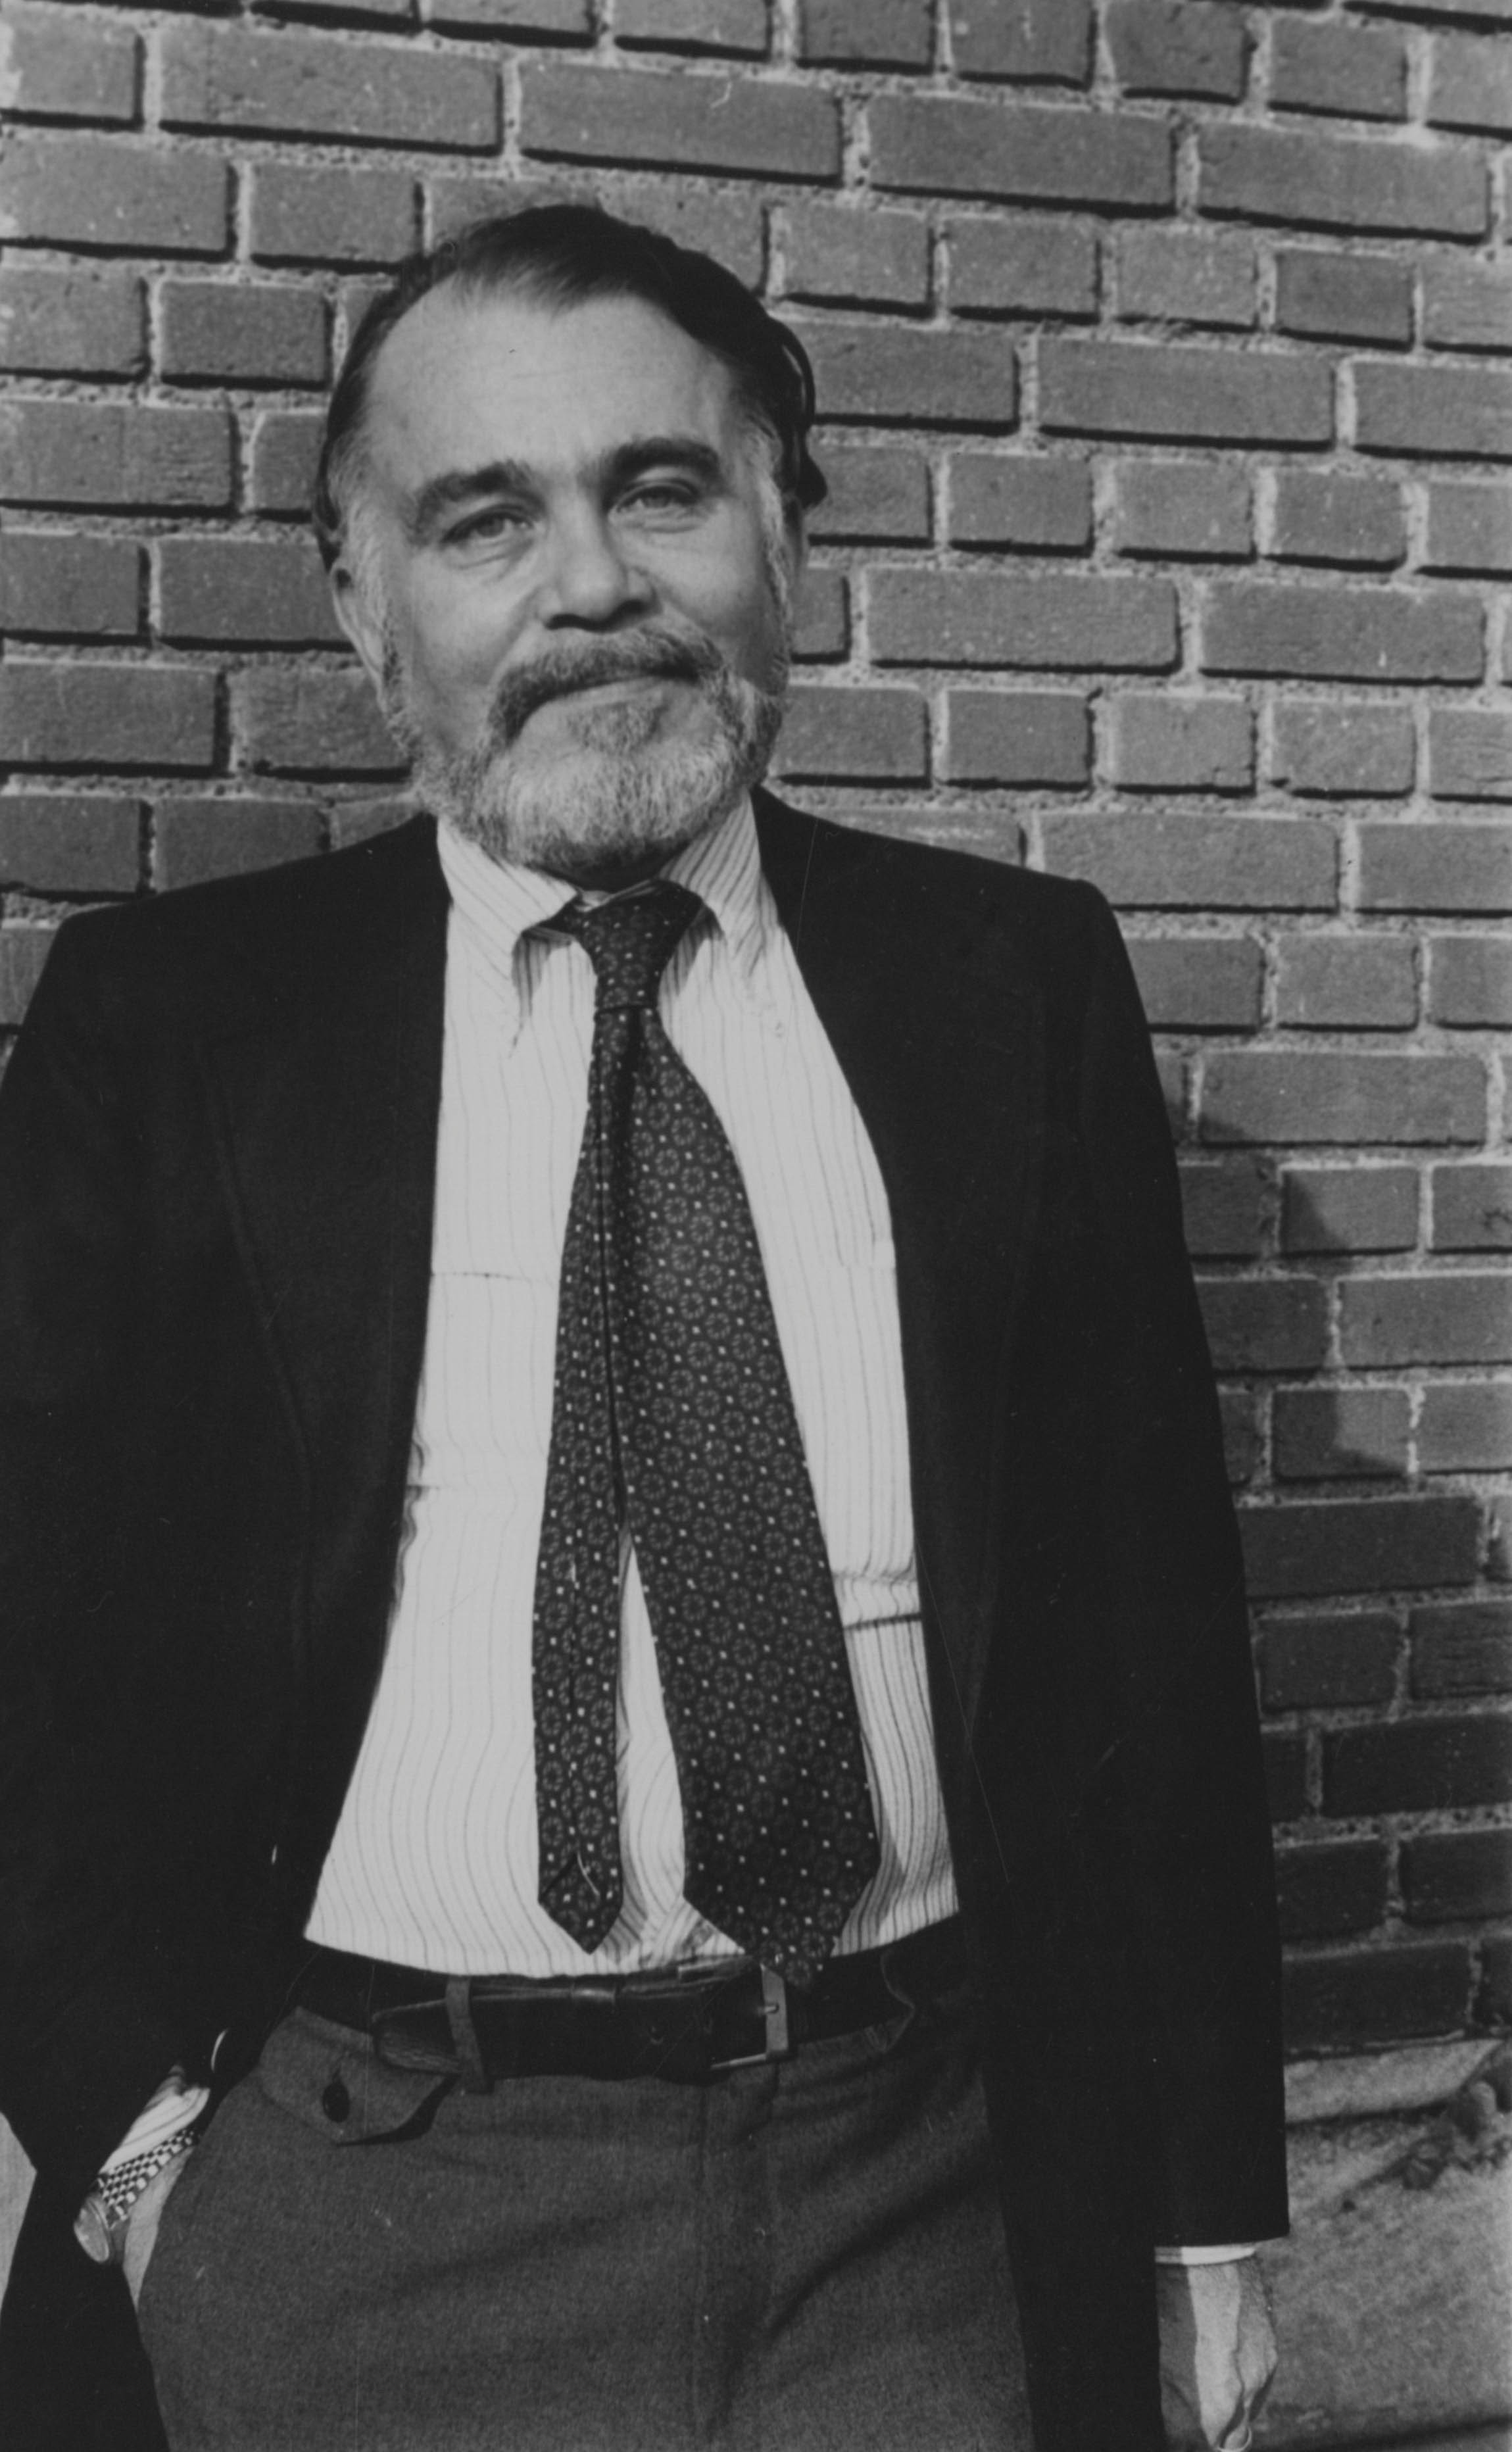 Prof. Marvin Levich in a full suit standing against a brick wall